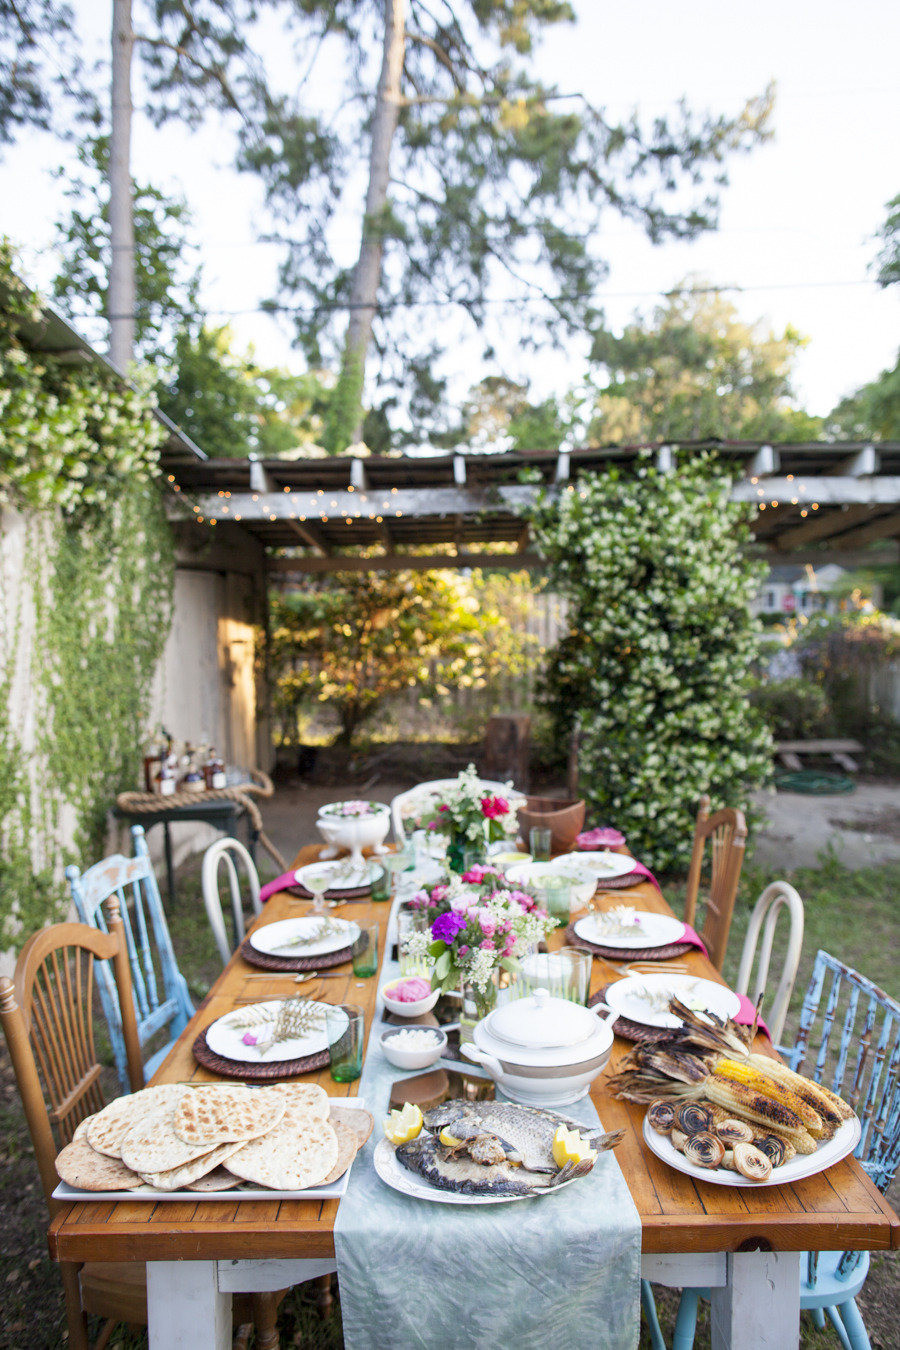 Backyard Party Decor Ideas
 50 Outdoor Party Ideas You Should Try Out This Summer